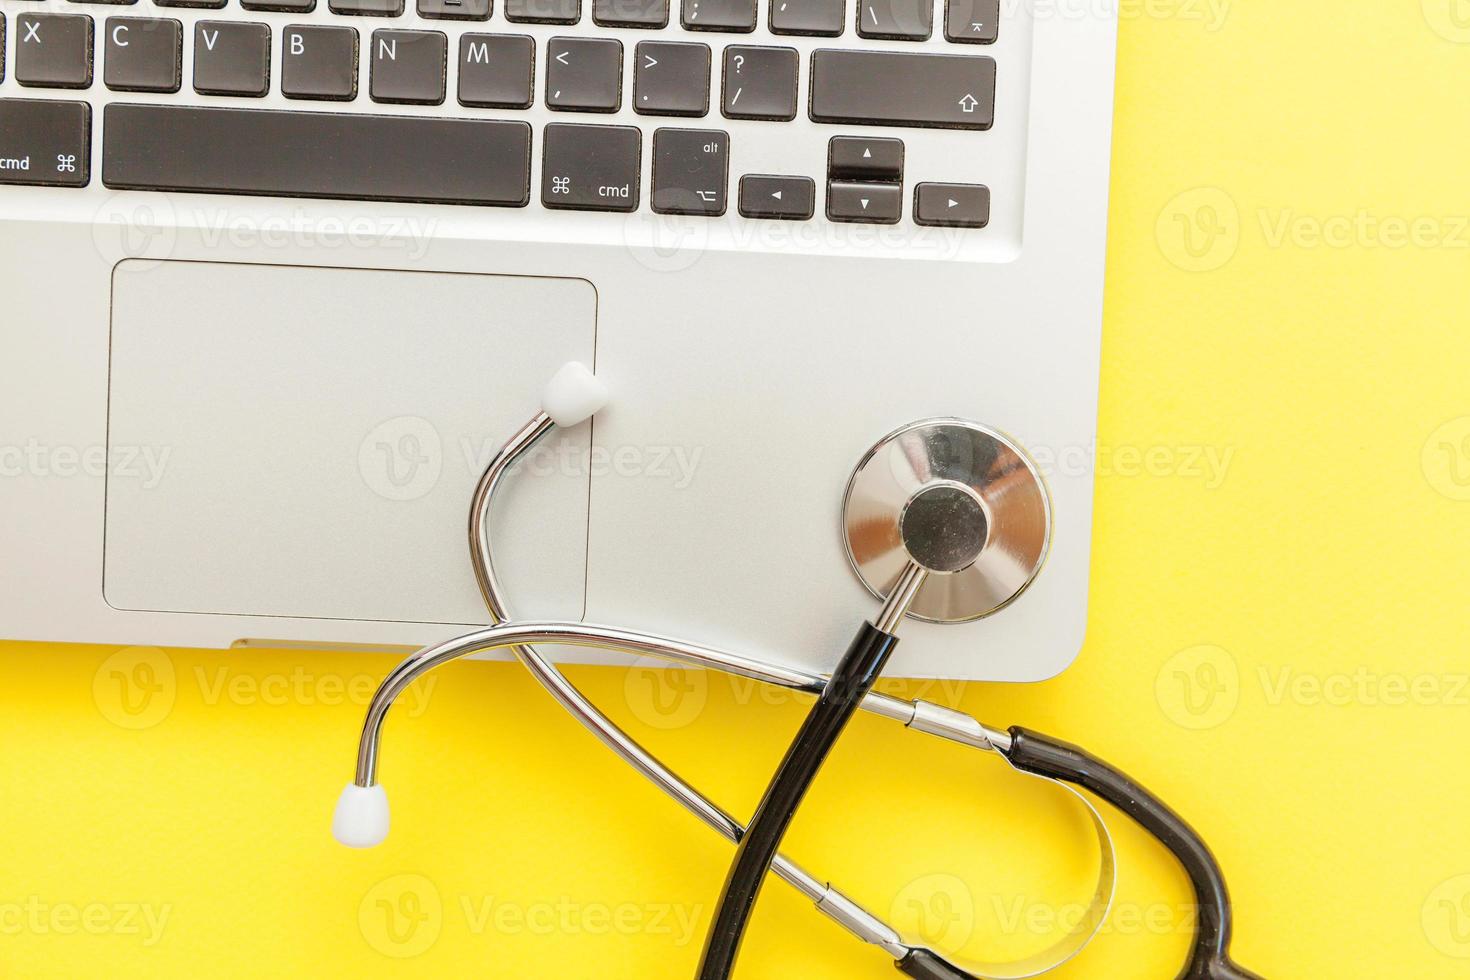 Stethoscope keyboard laptop computer isolated on yellow background. Modern medical Information technology and sofware advances concept. Computer and gadget diagnostics and repair photo